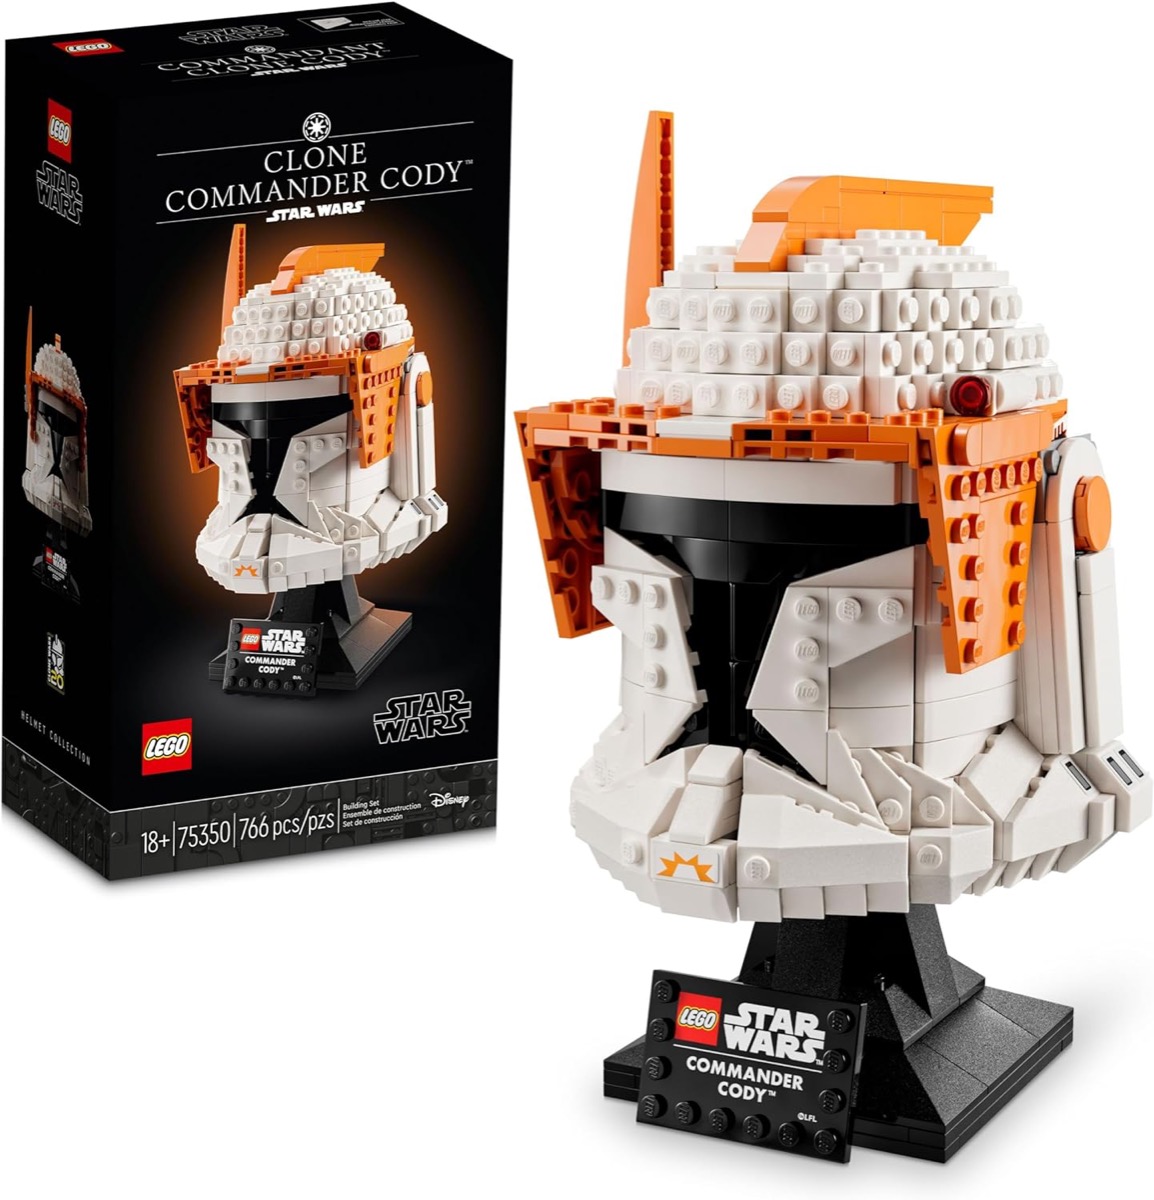 A LEGO version of the Clone Commander helmet from "Star Wars" 